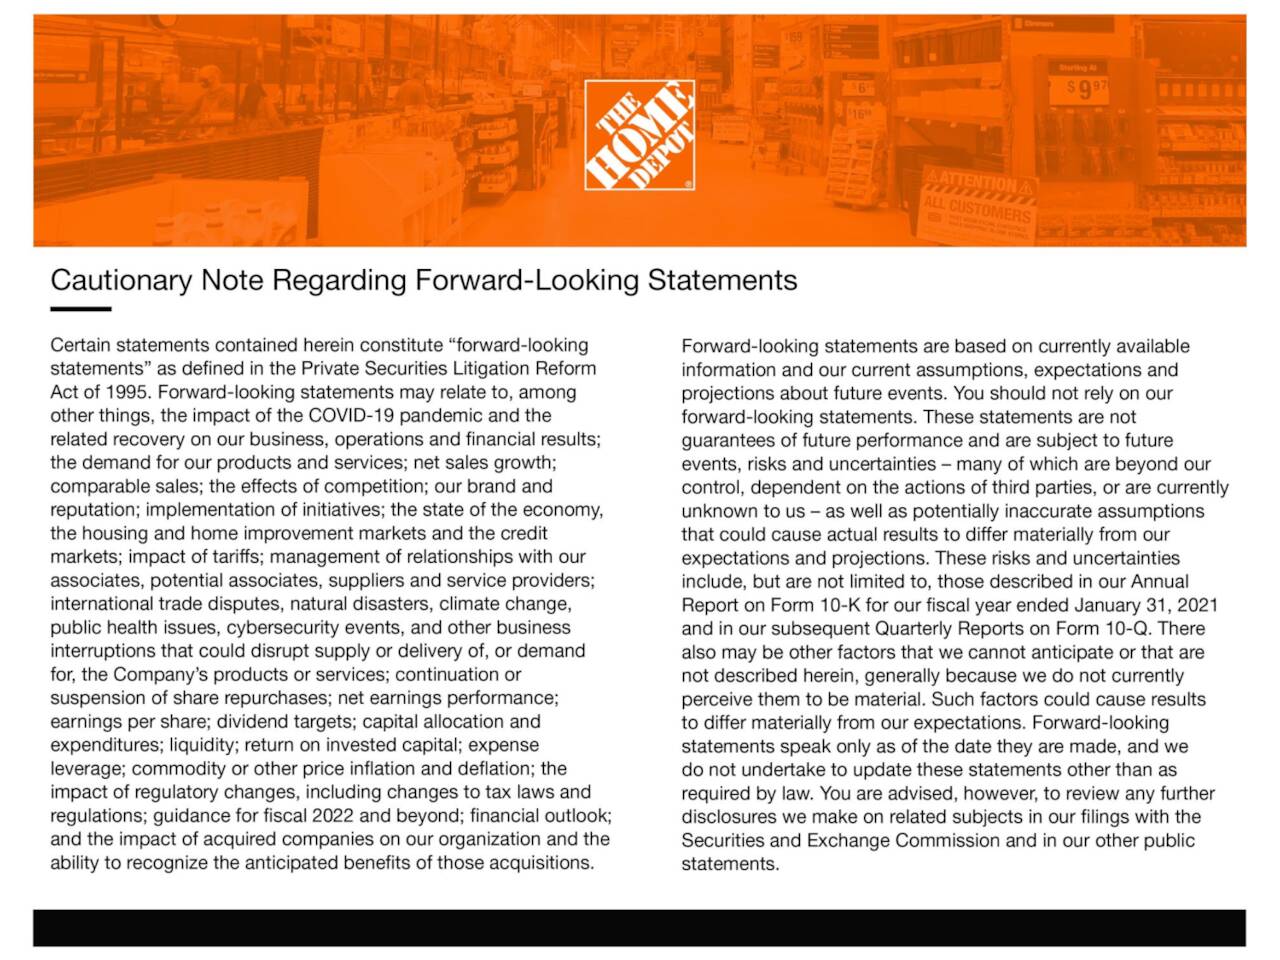 The Home Depot, Inc. 2022 Q4 Results Earnings Call Presentation